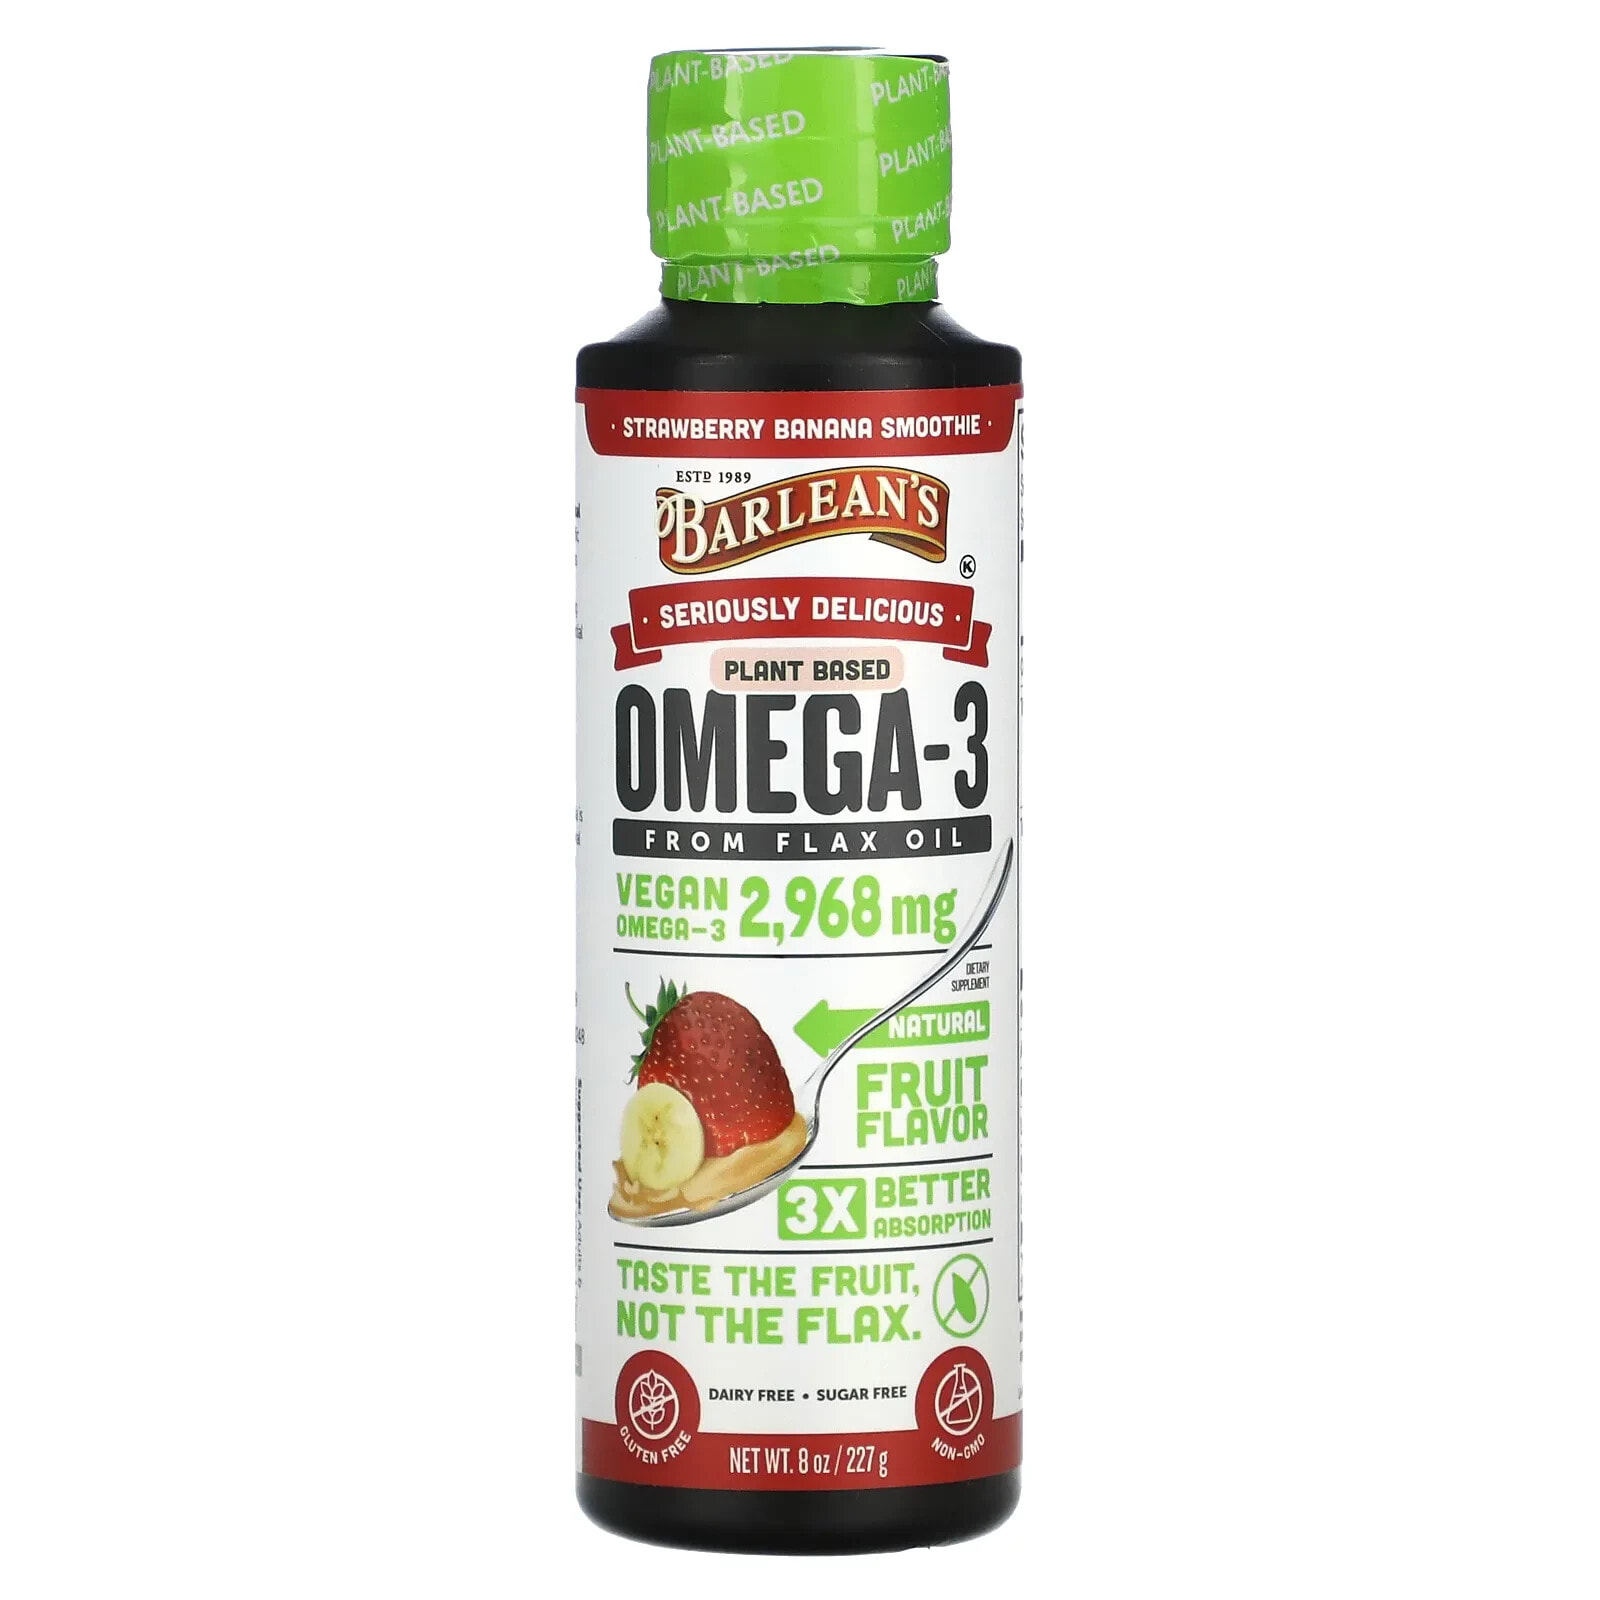 Plant Based Omega-3 from Flax Oil, Strawberry Banana Smoothie, 8 oz (227 g)